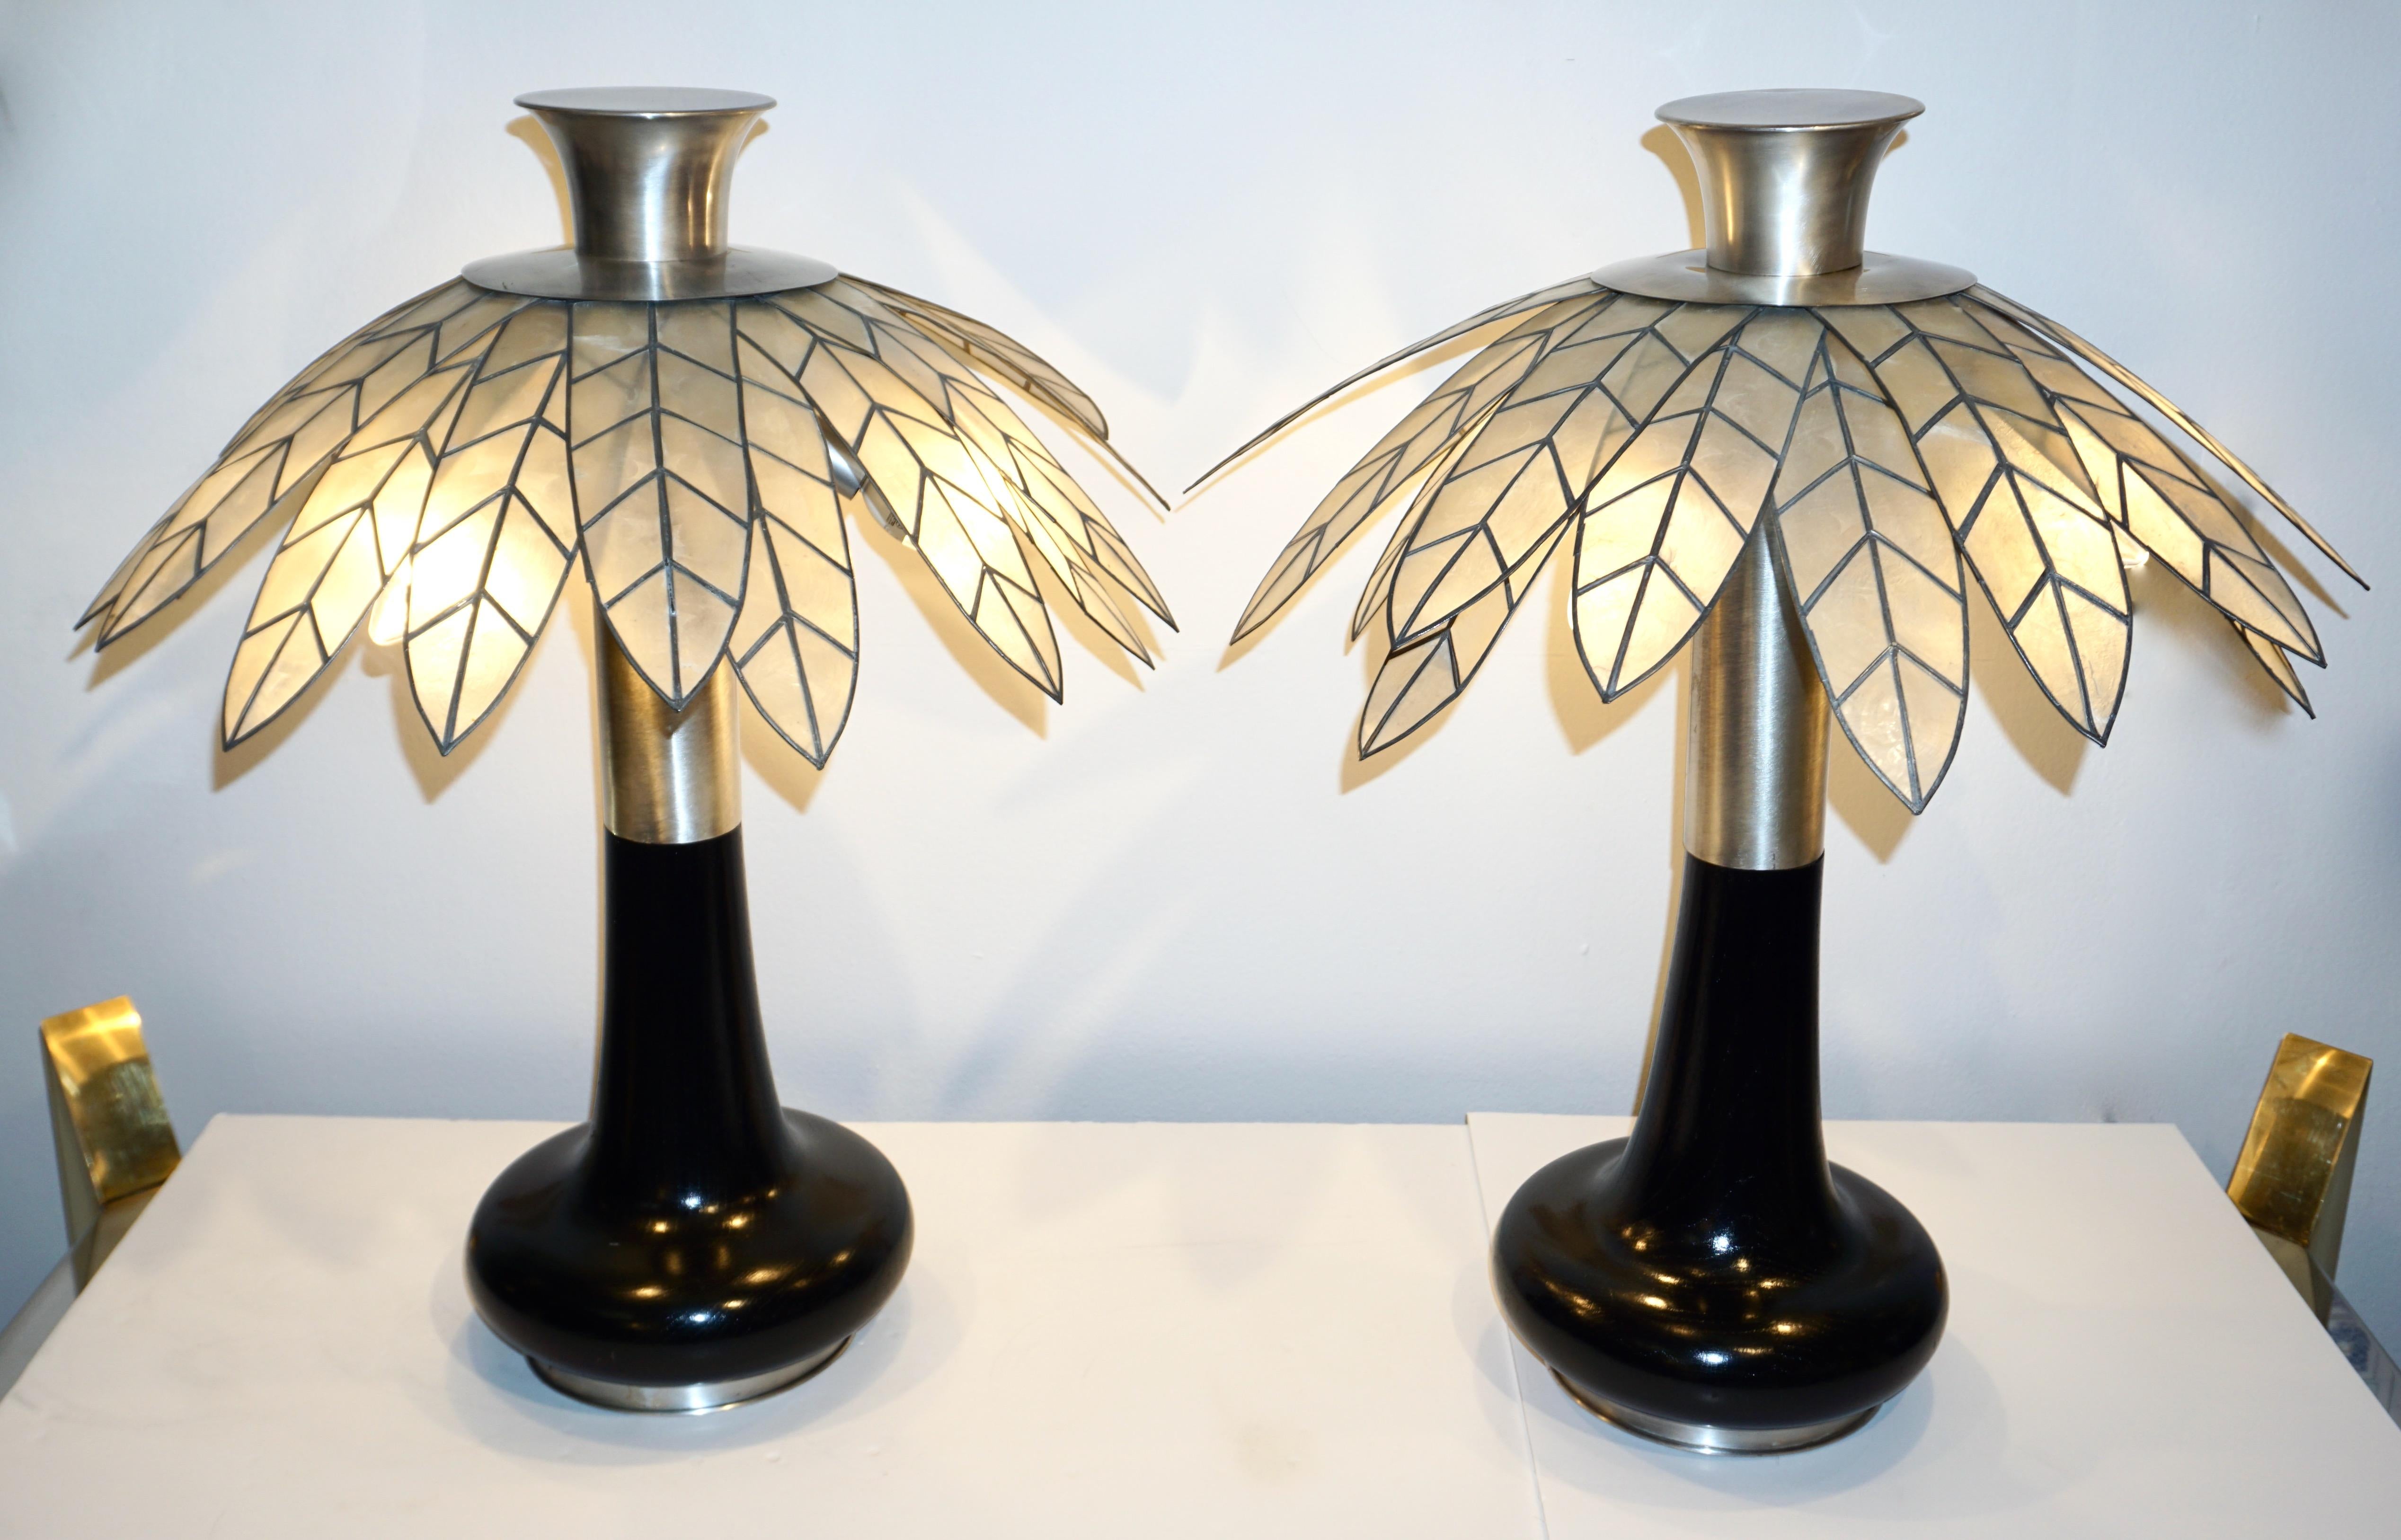 These exclusive vintage Mid-Century Modern table lamps are entirely handcrafted, a limited creation by Banci - Firenze, in Art Deco style with a modern Minimalist organic design, the handmade leaded mother of pearl shades in the shape of a palm tree